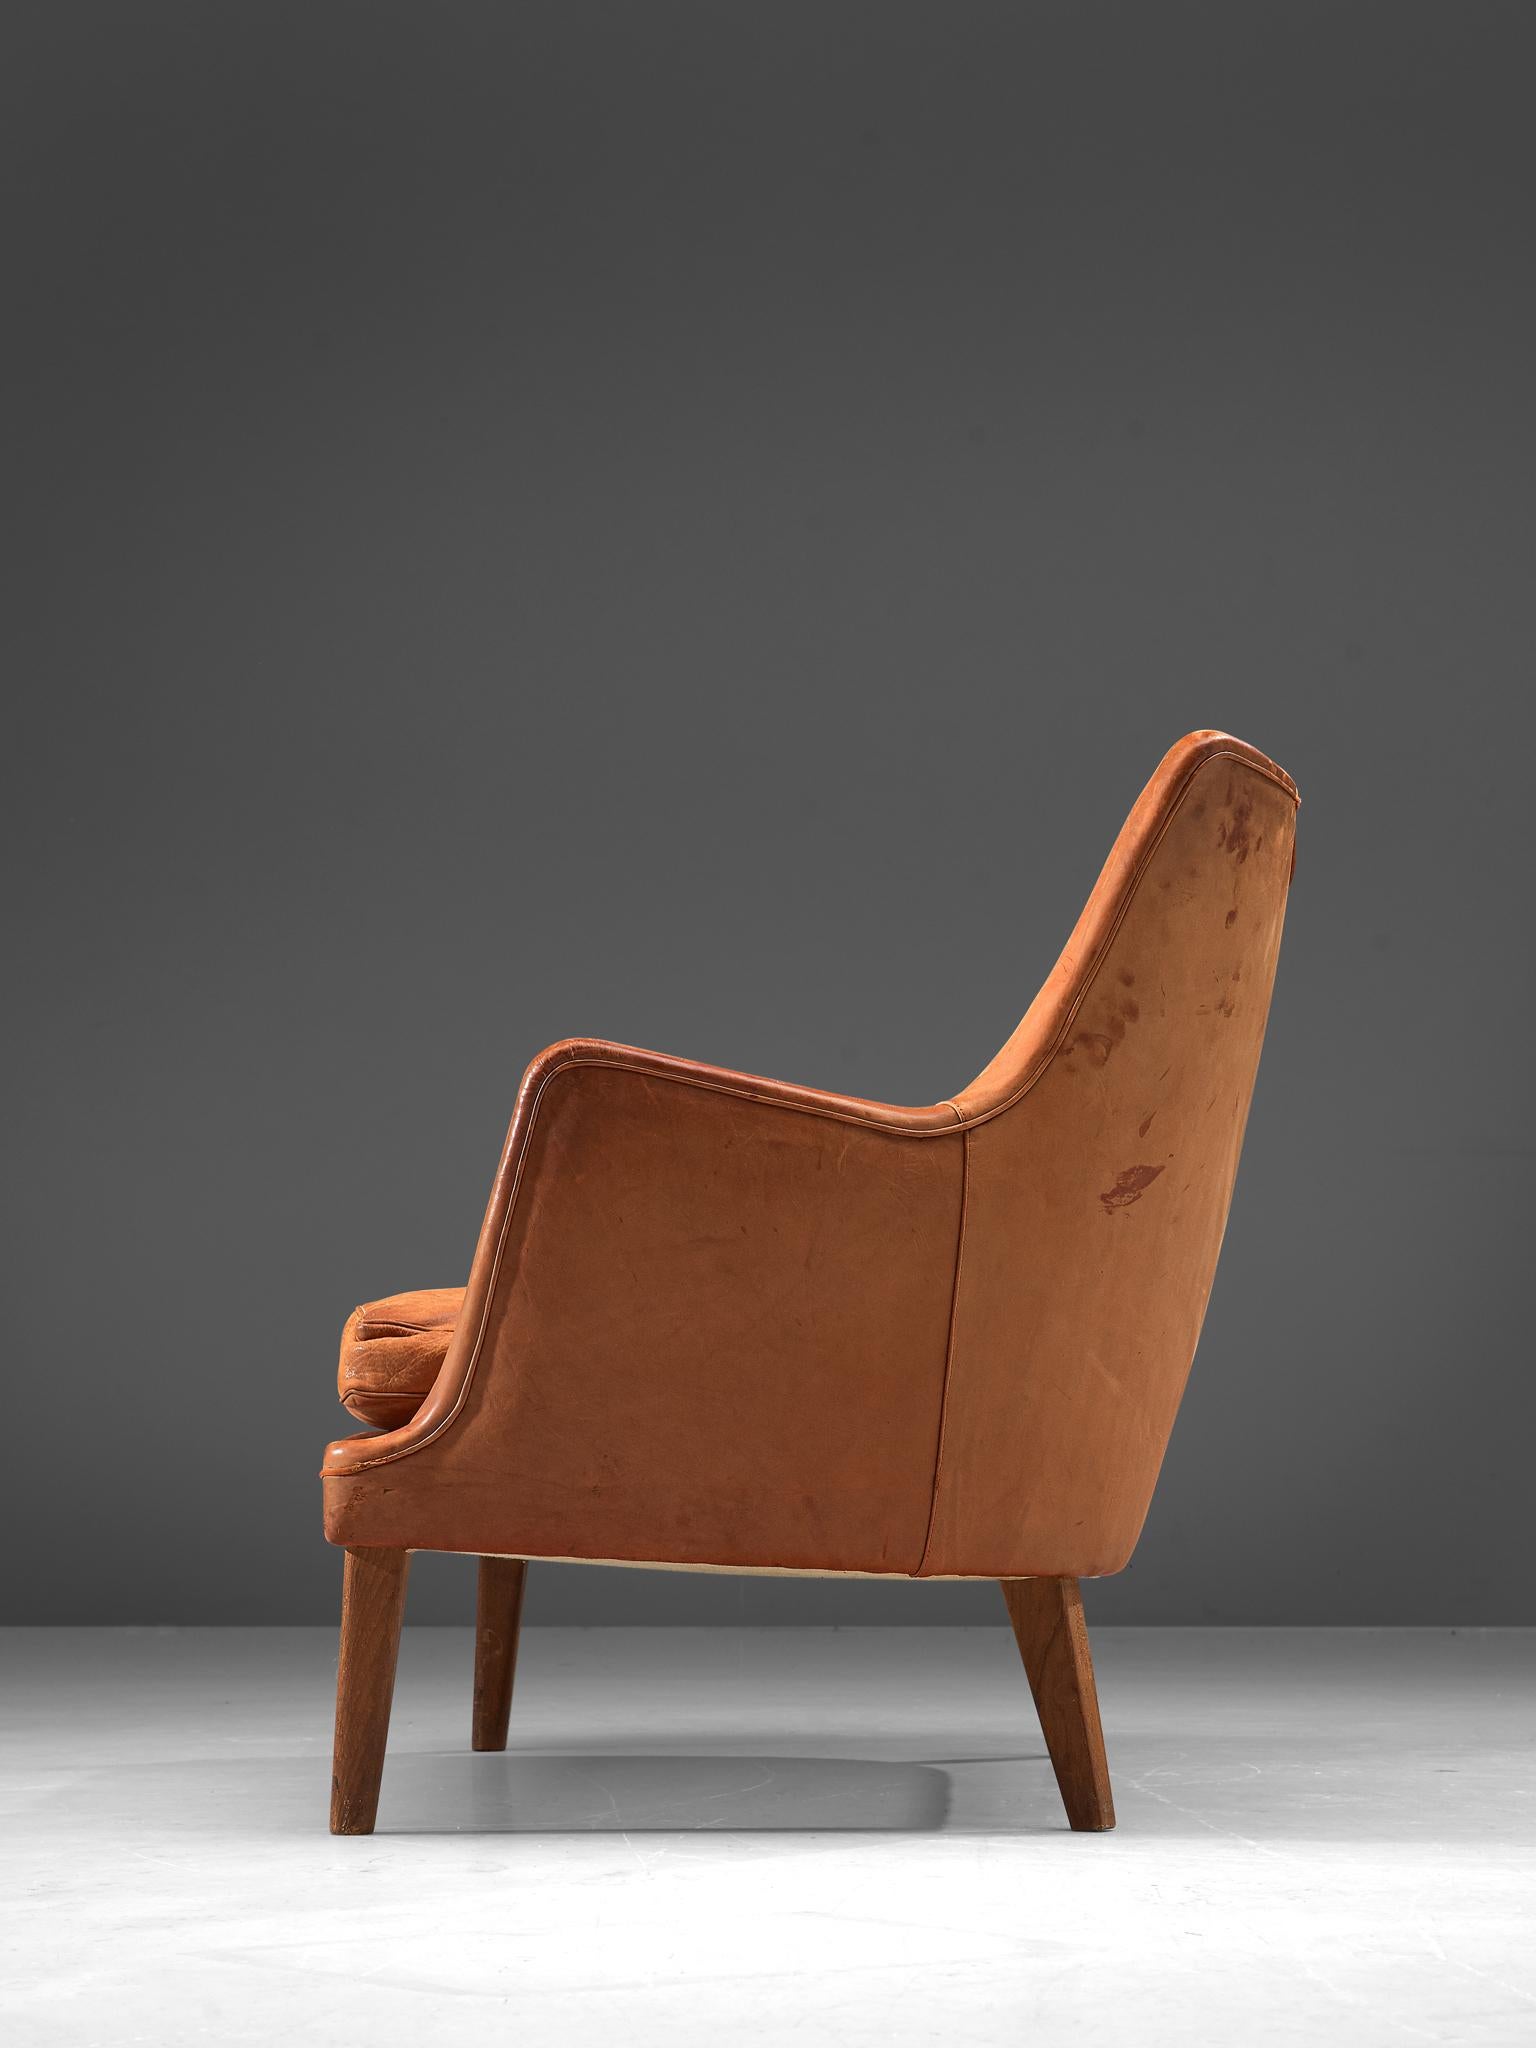 Mid-20th Century Arne Vodder Settee in Patinated Cognac Leather